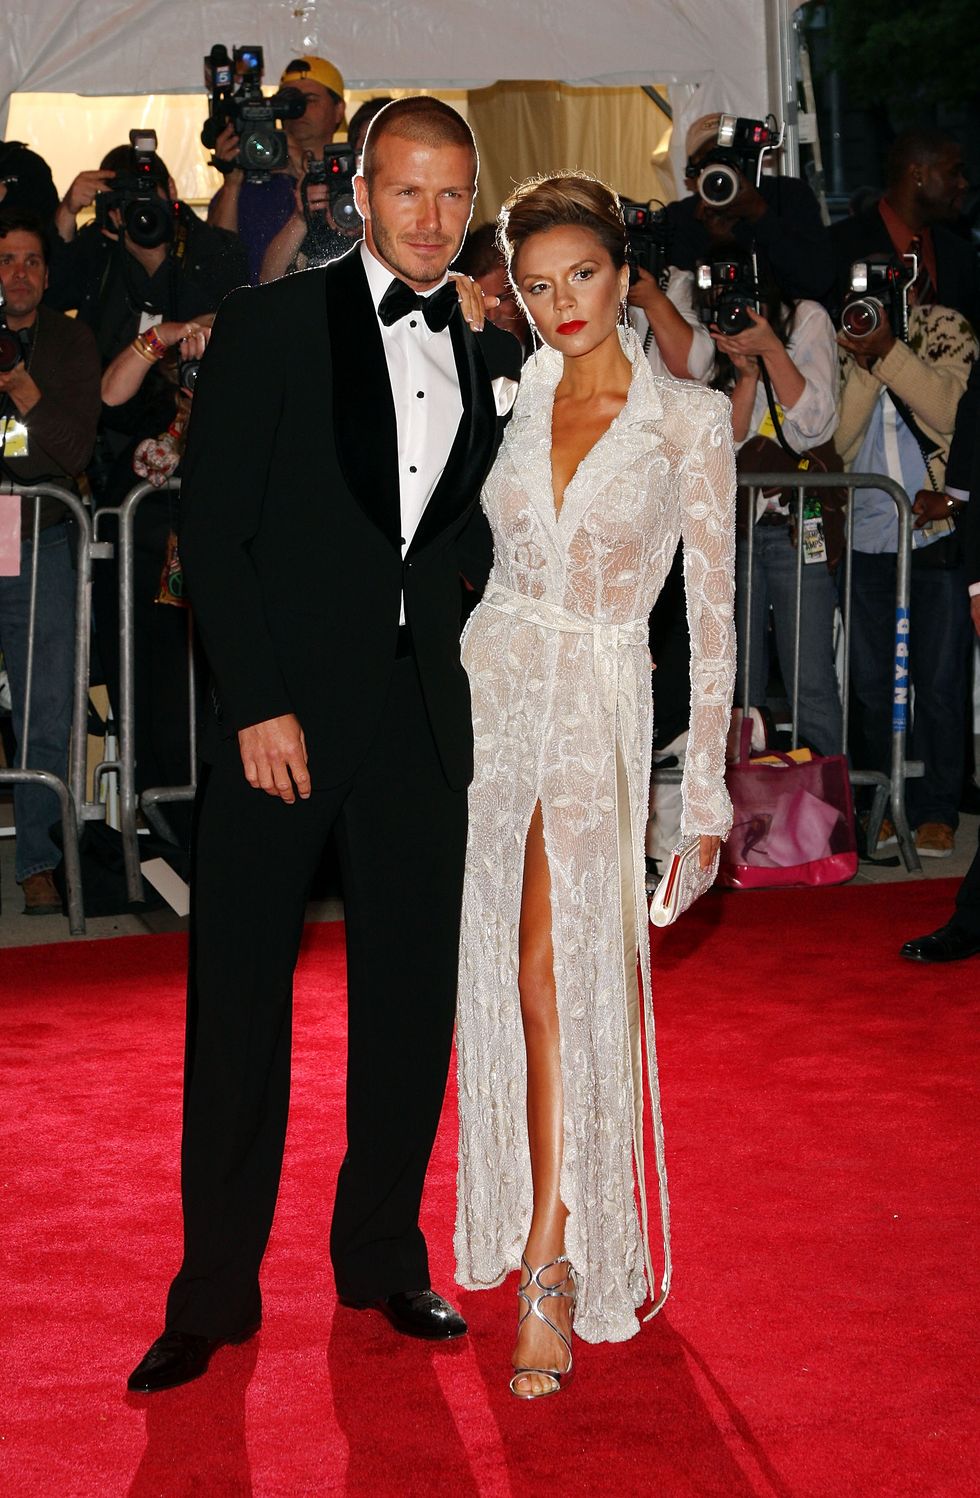 new york may 05 soccer star david beckham l and victoria beckham arrive at the metropolitan museum of art costume institute gala, superheroes fashion and fantasy, held at the metropolitan museum of art on may 5, 2008 in new york city photo by stephen lovekingetty images